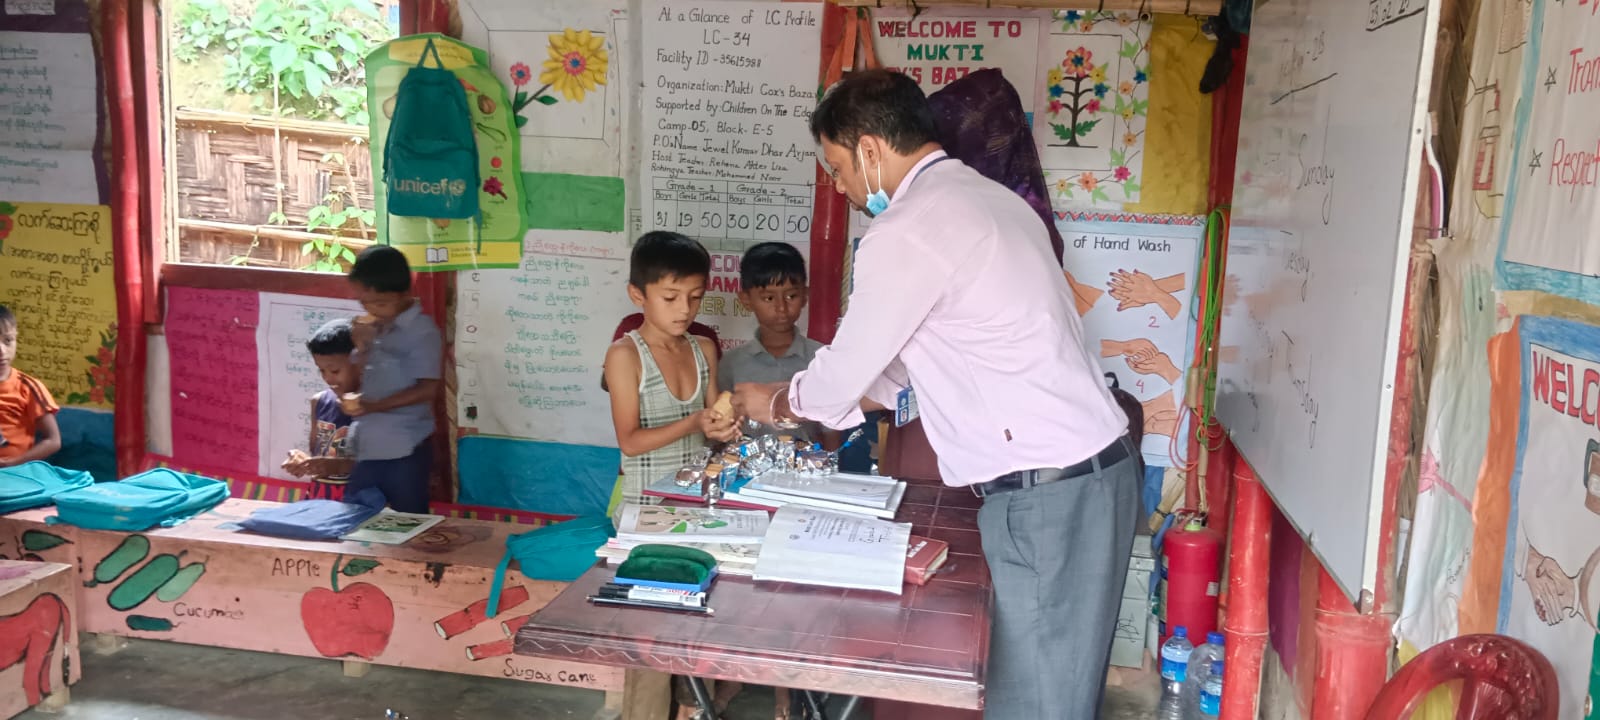 Panesh at one of the learning centres with the childrenPicture